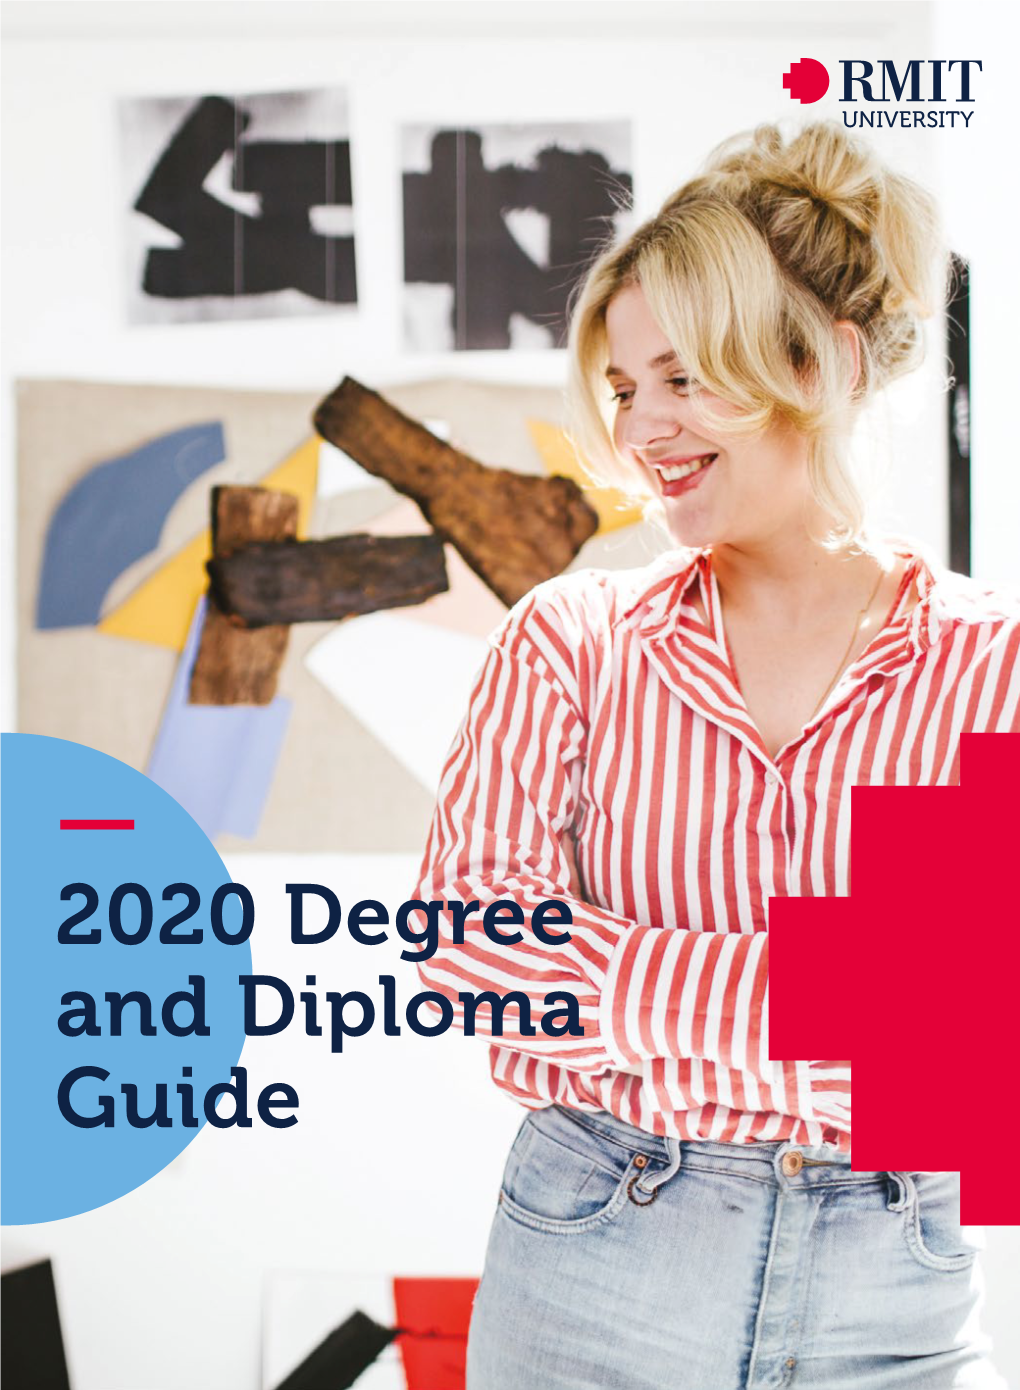 2020 Degree and Diploma Guide — Contents